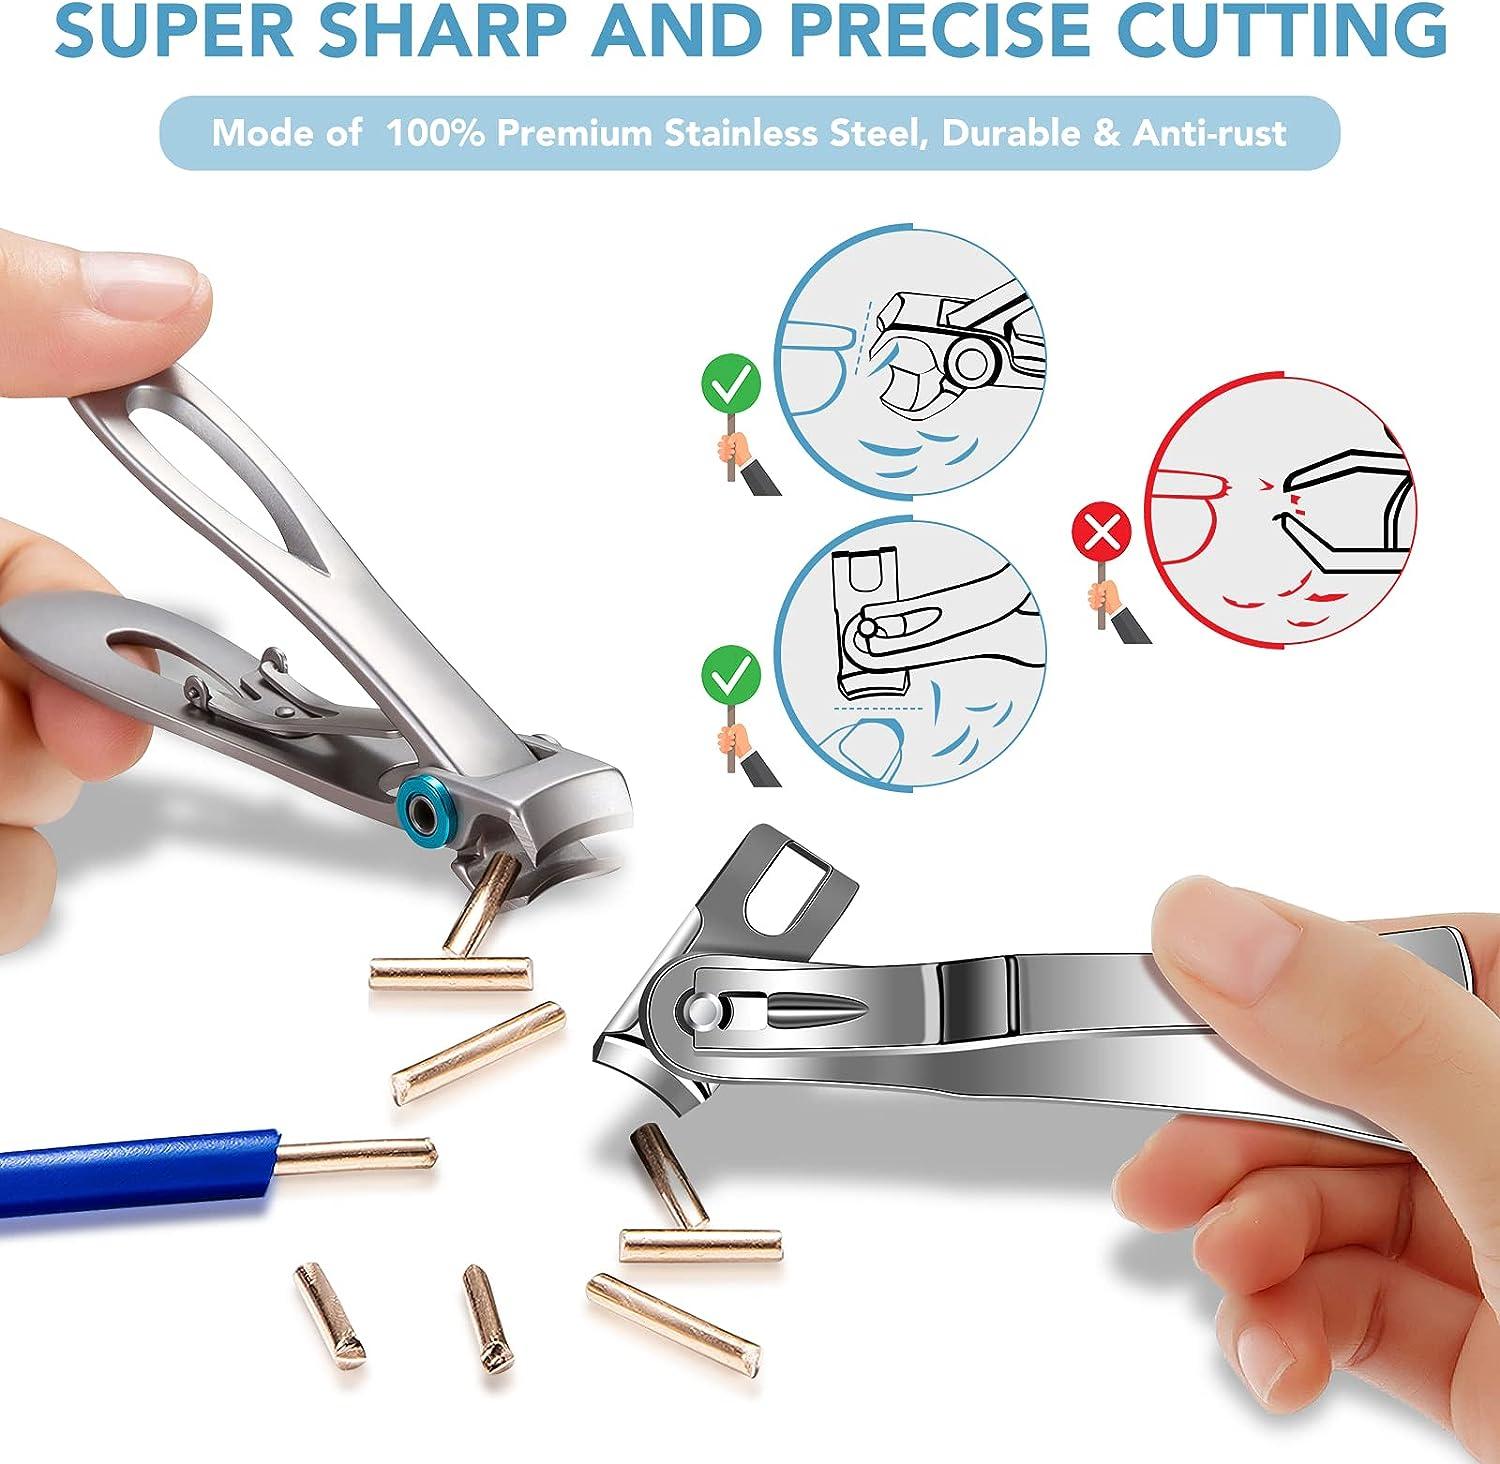 New Type Of Large Opening Nail Clipper With A 45-degree Angled